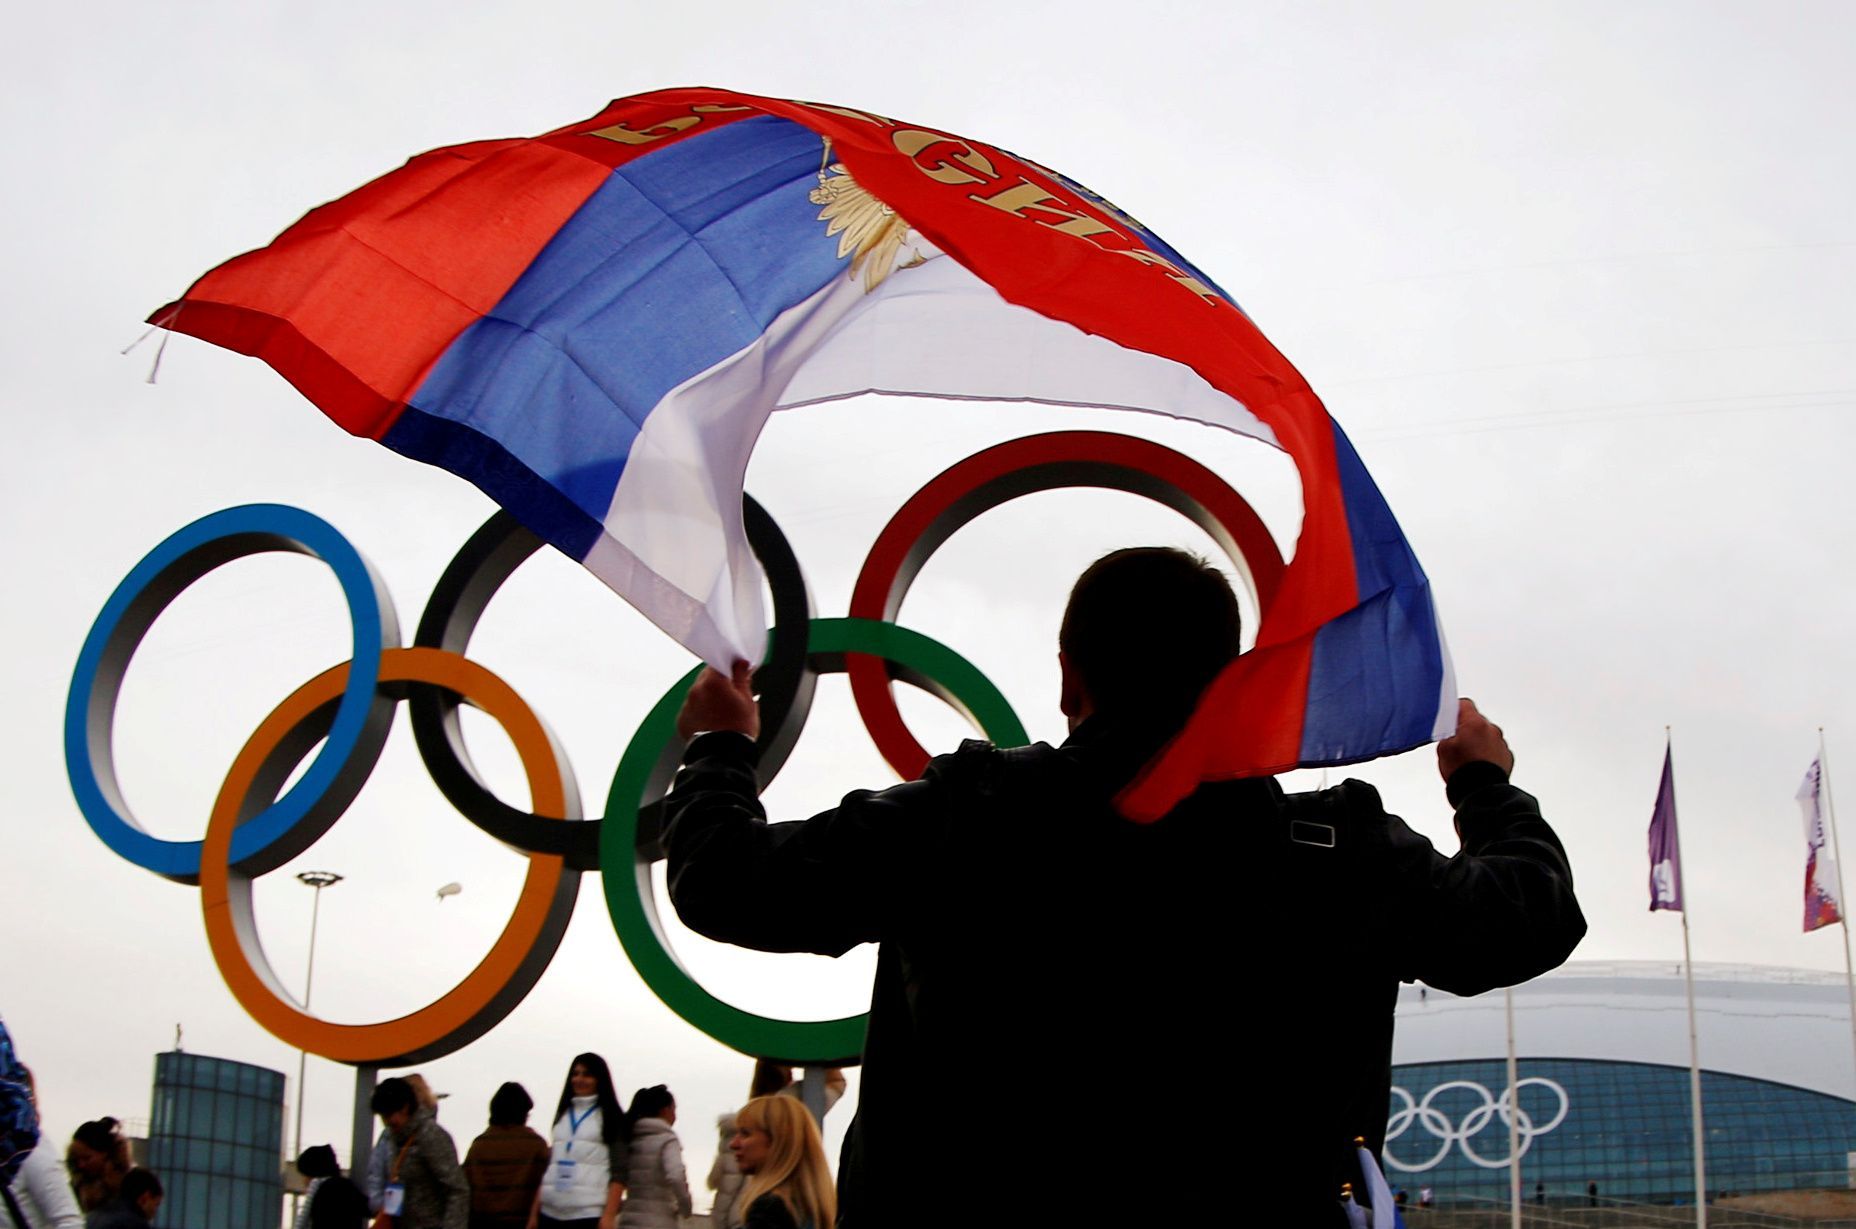 FILE PHOTO: Man carries the Russian flag past the Olympic rings at the Olympic Park during the 2014 Sochi Winter Olympics